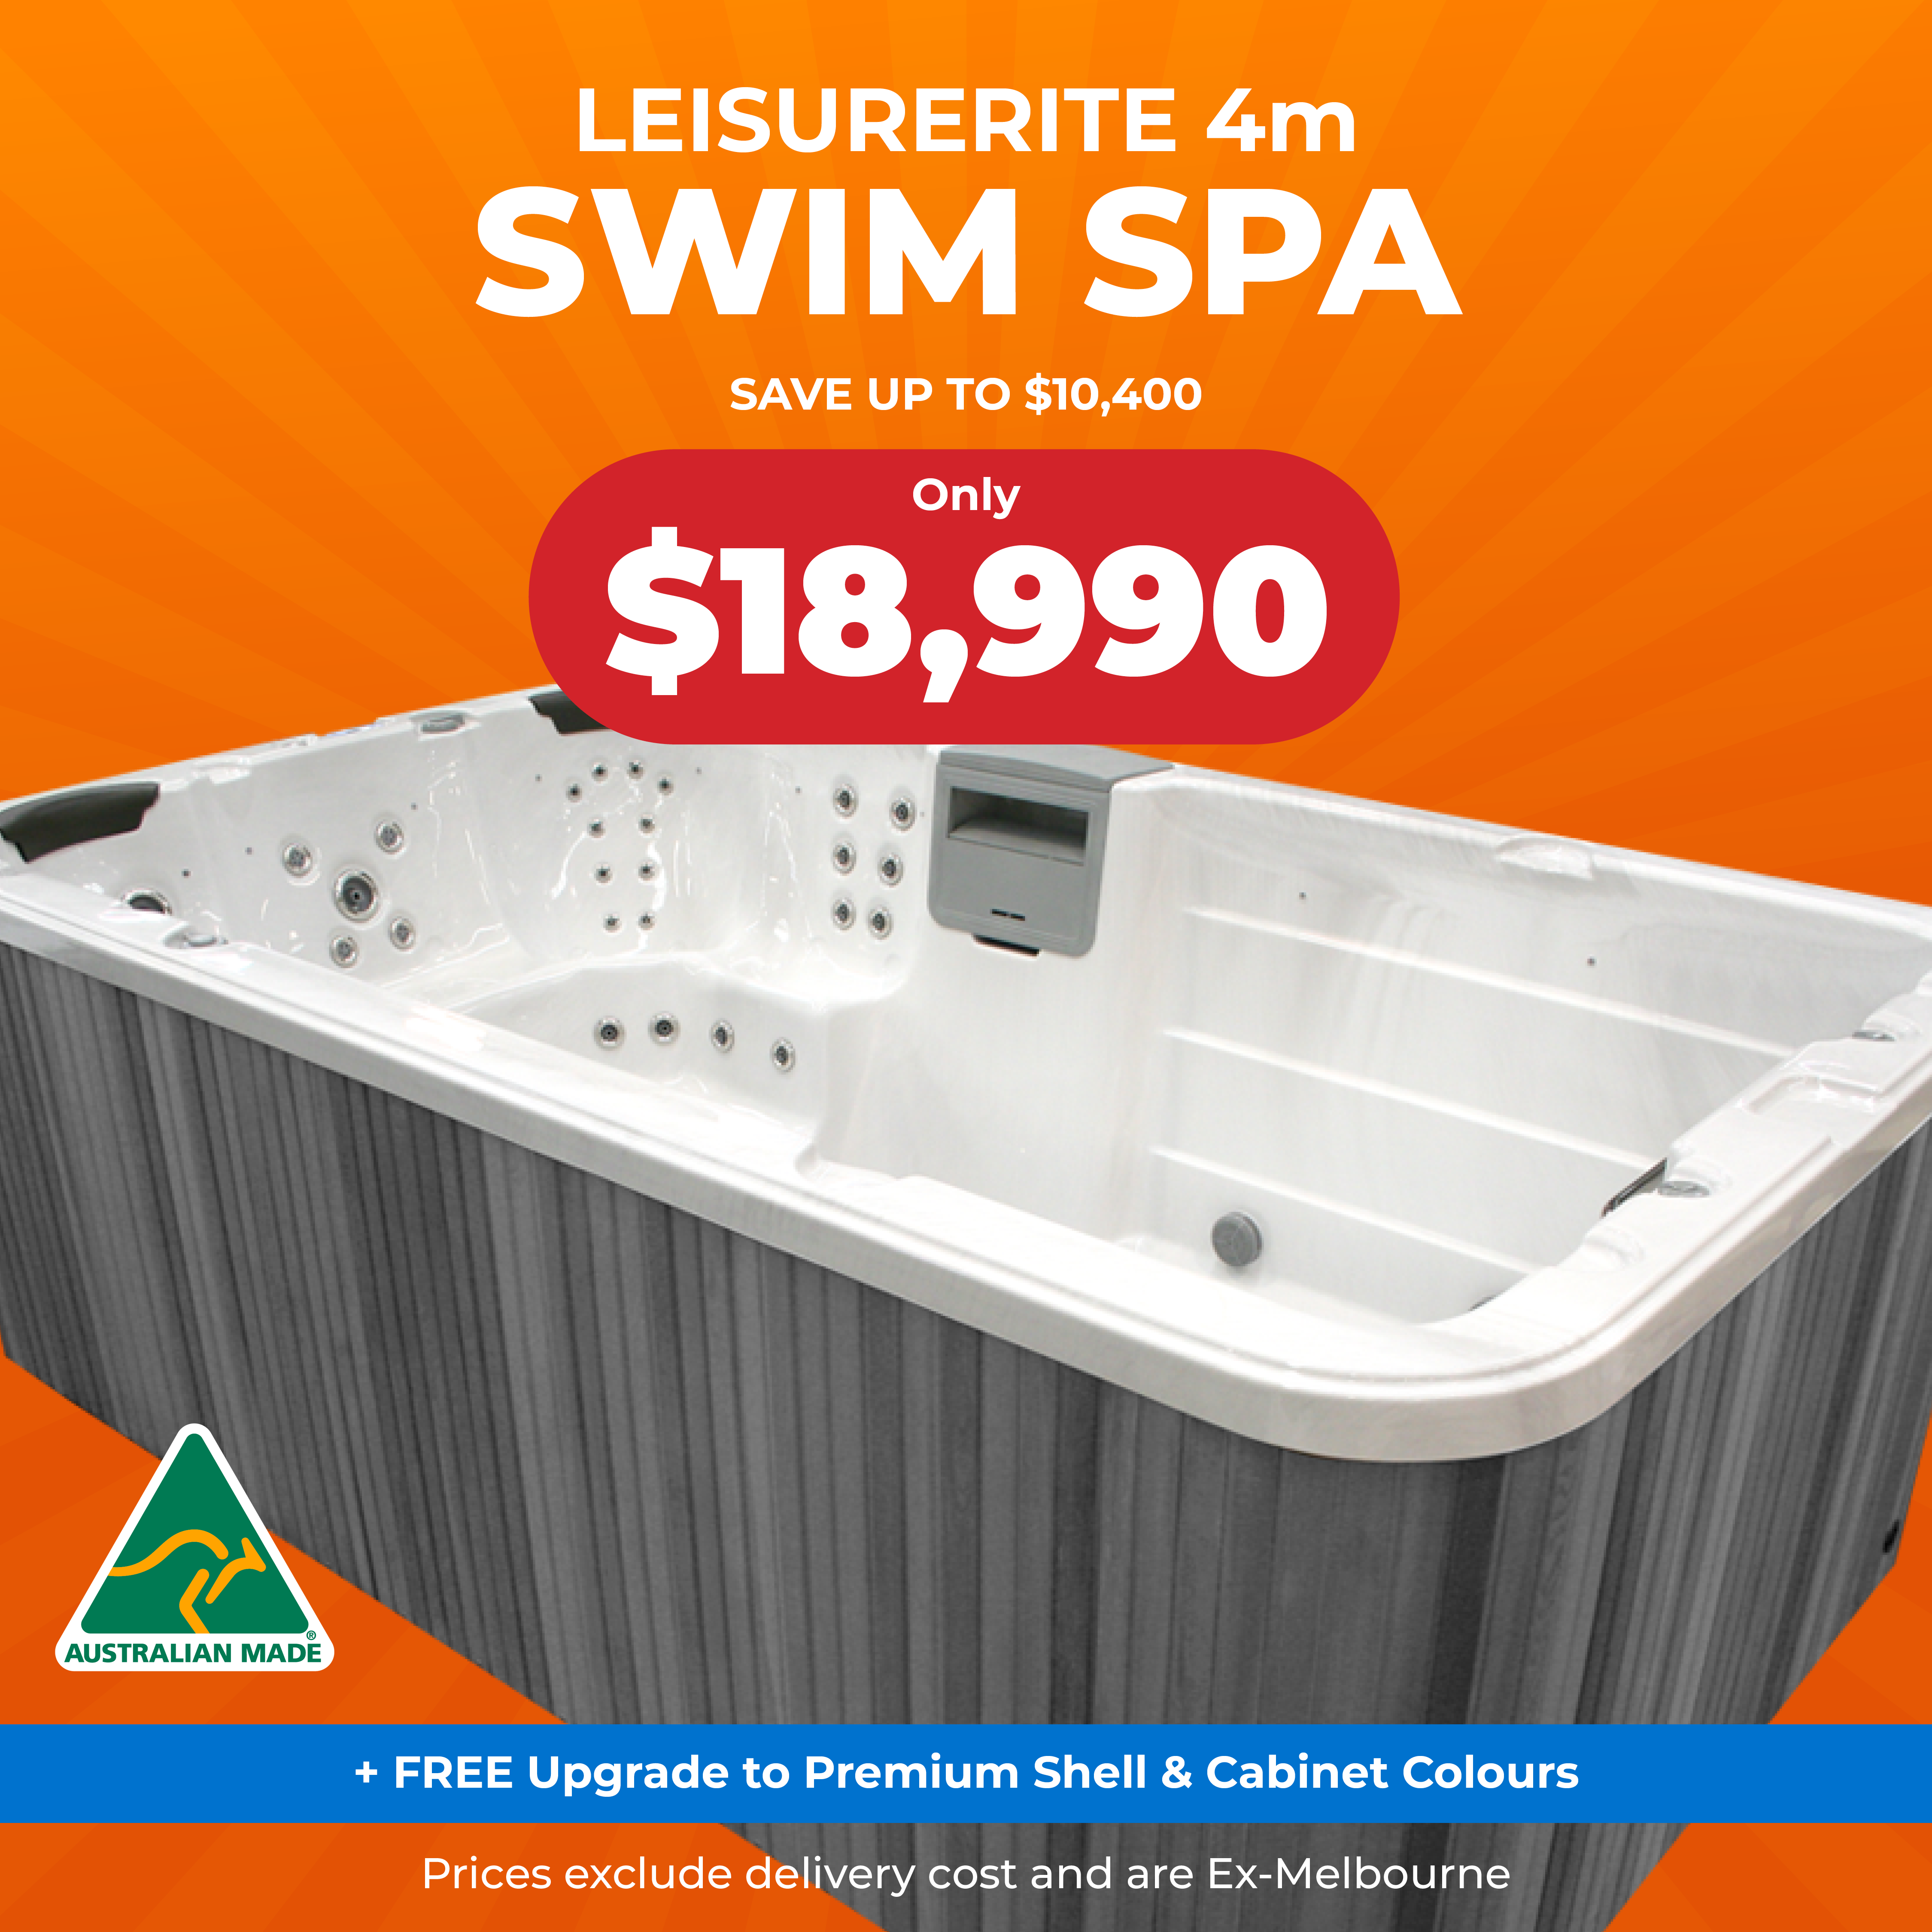 SIG00861028.0324_Just-_Spas_National_April_Offers_BOFPost_FA6